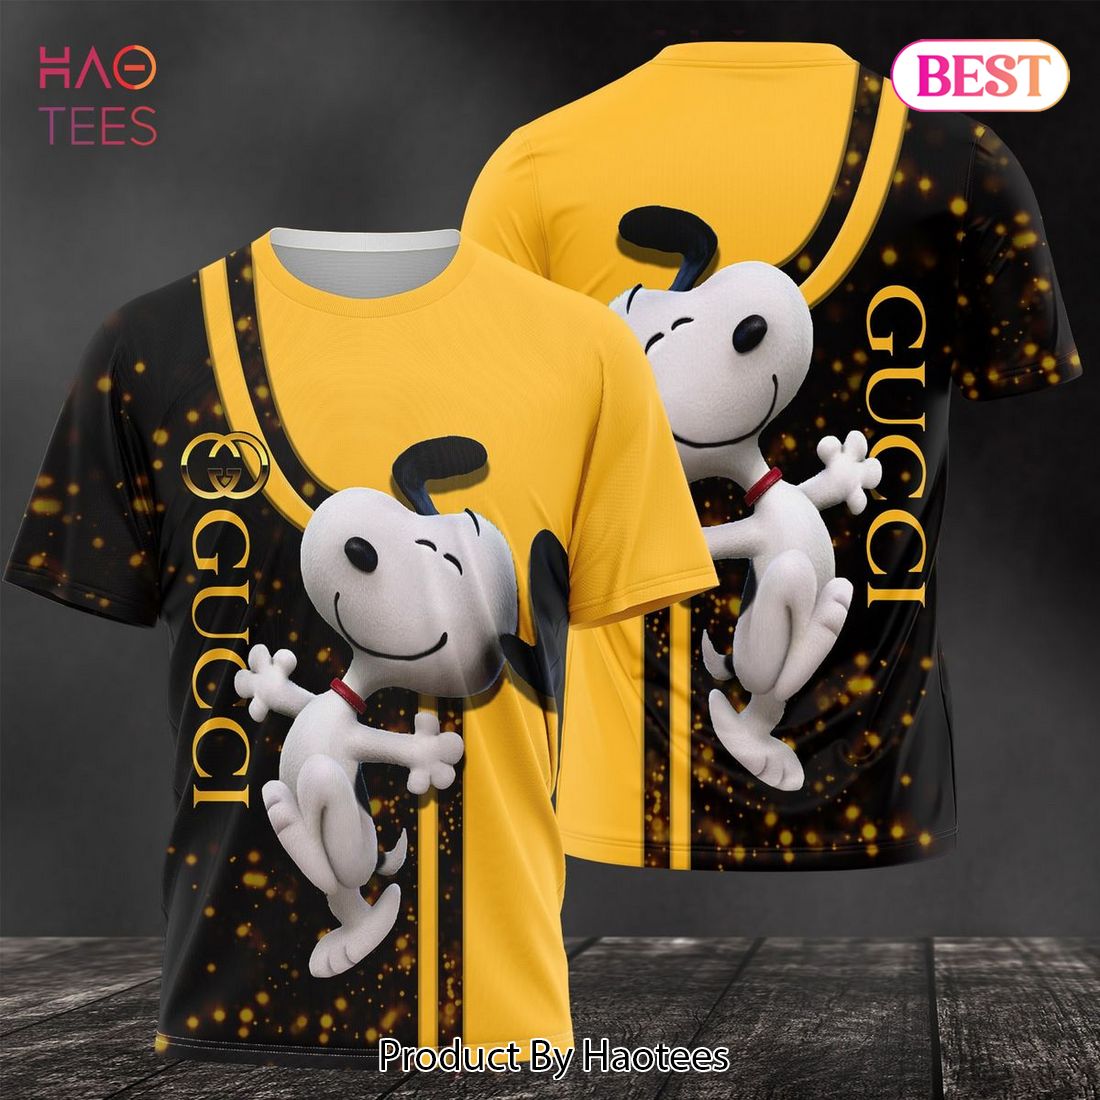 BEST Gucci Snoopy Gold Mix Black Luxury Color 3D T-Shirt Limited Edition